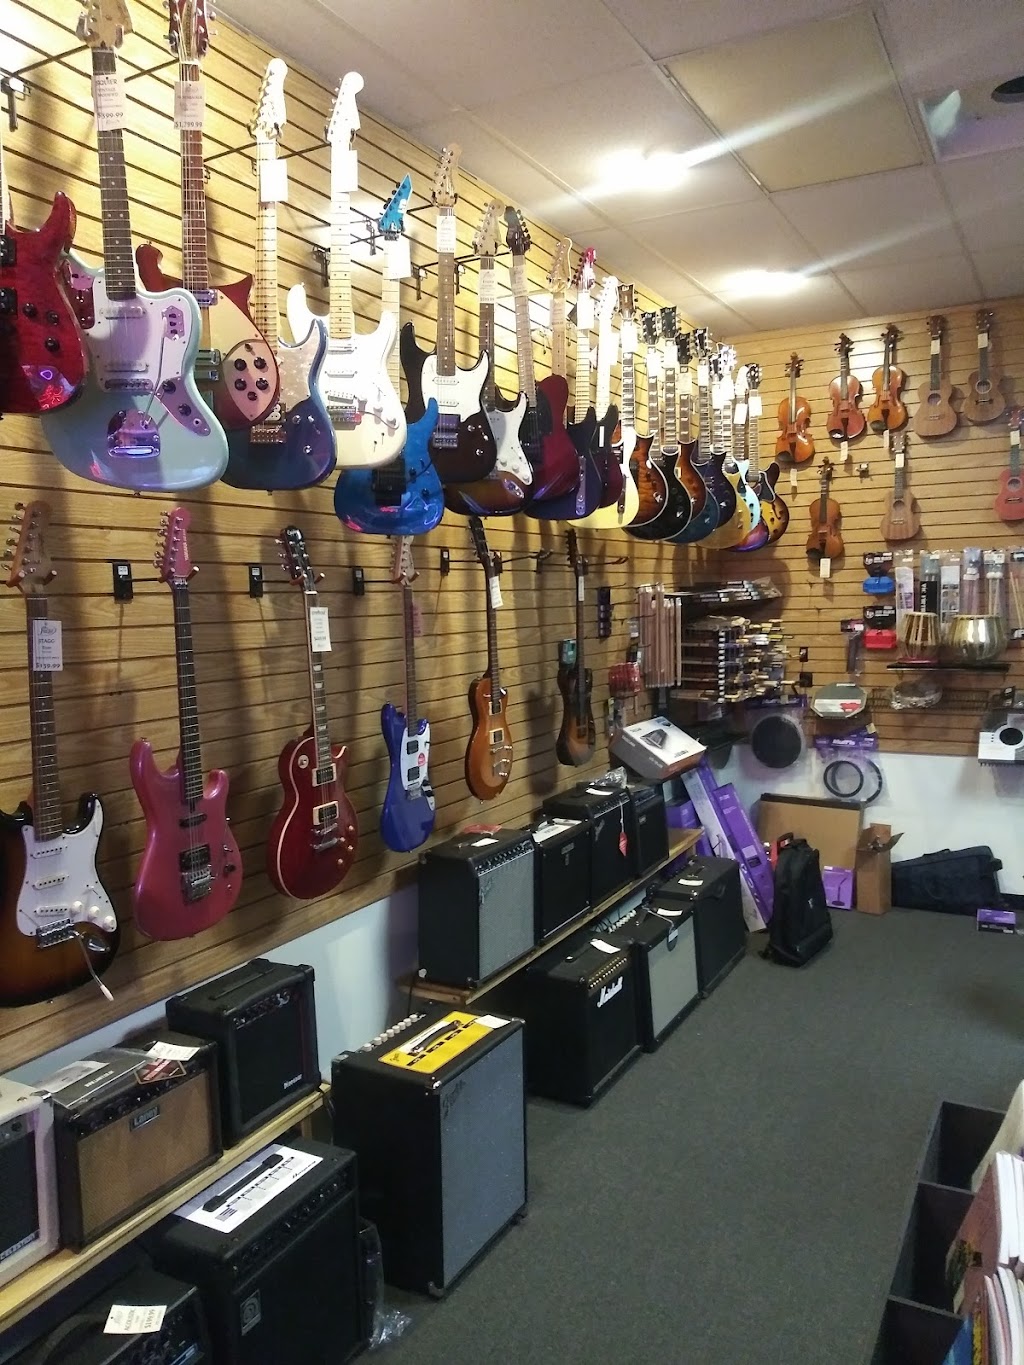 Music Forte | 8919 New Falls Rd, Levittown, PA 19054 | Phone: (215) 946-9295